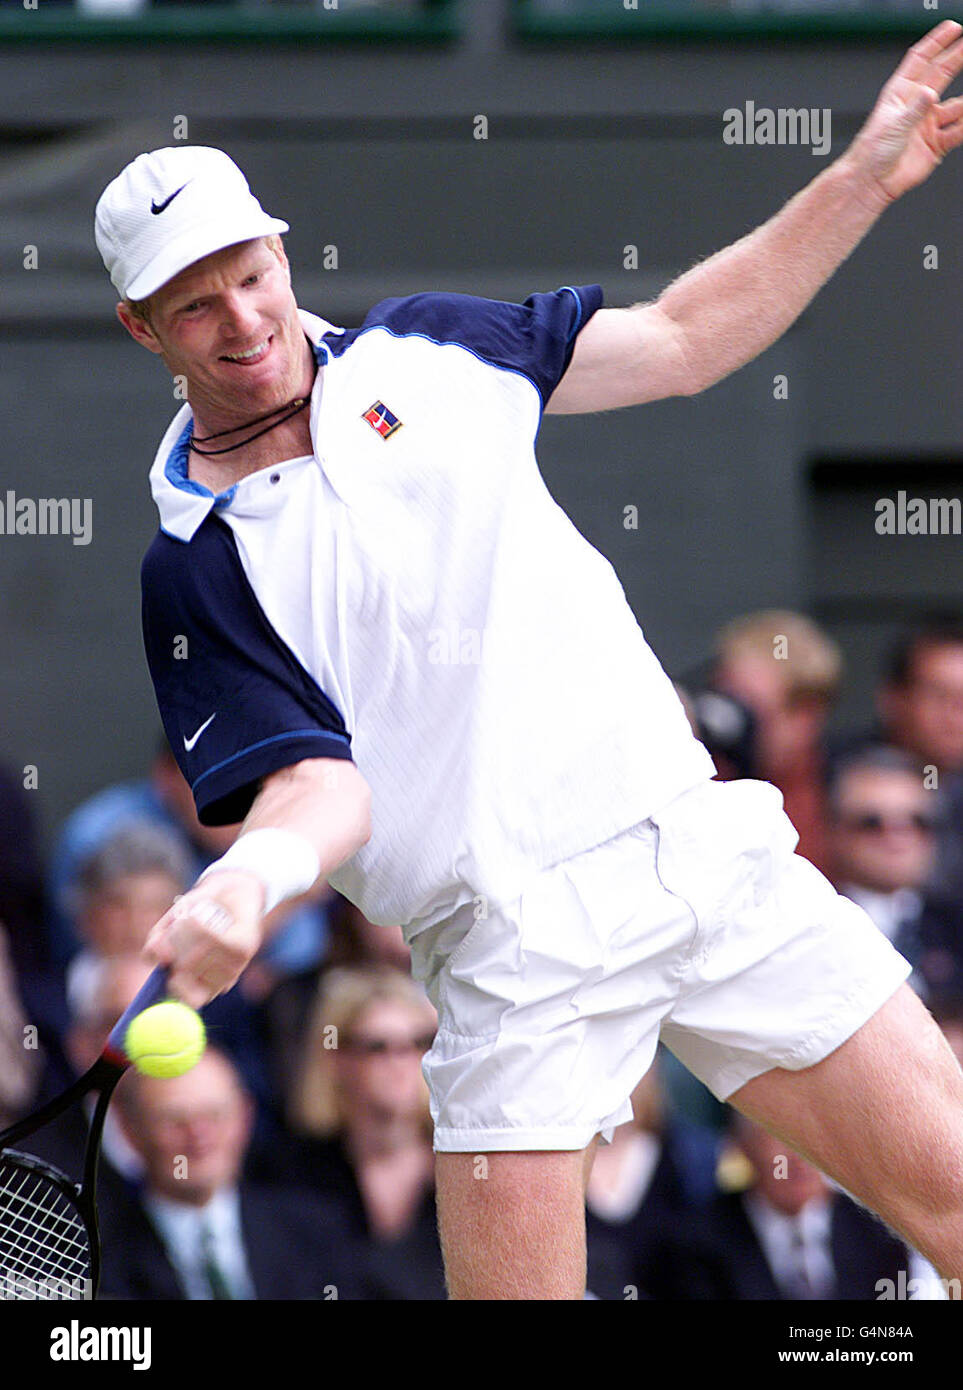 No commercial use. American Jim Courier in action during his match against Tim Henman, at the 1999 Wimbledon tennis Championships. Stock Photo